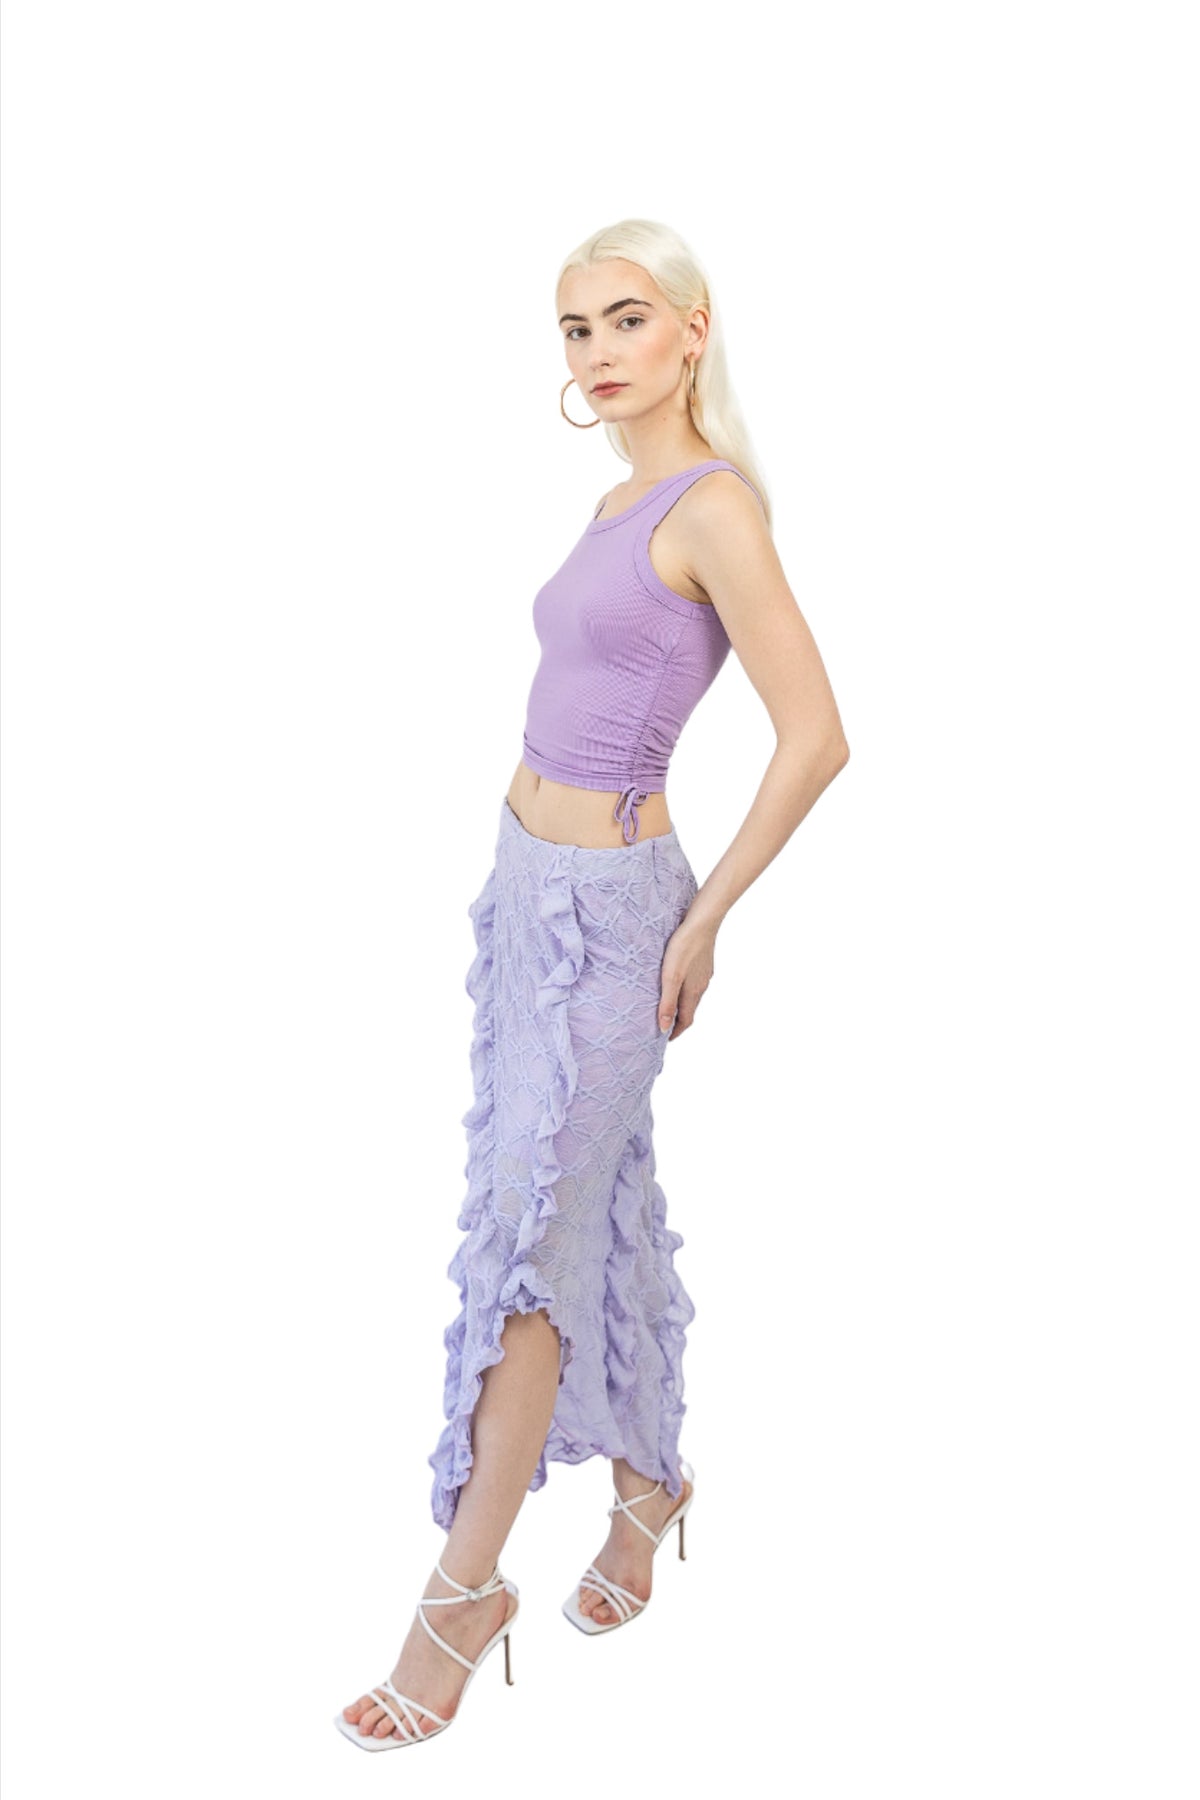 Model wears Mermaid Maxi Skirt in Lilac. Left side facing. Styled with a purple top.